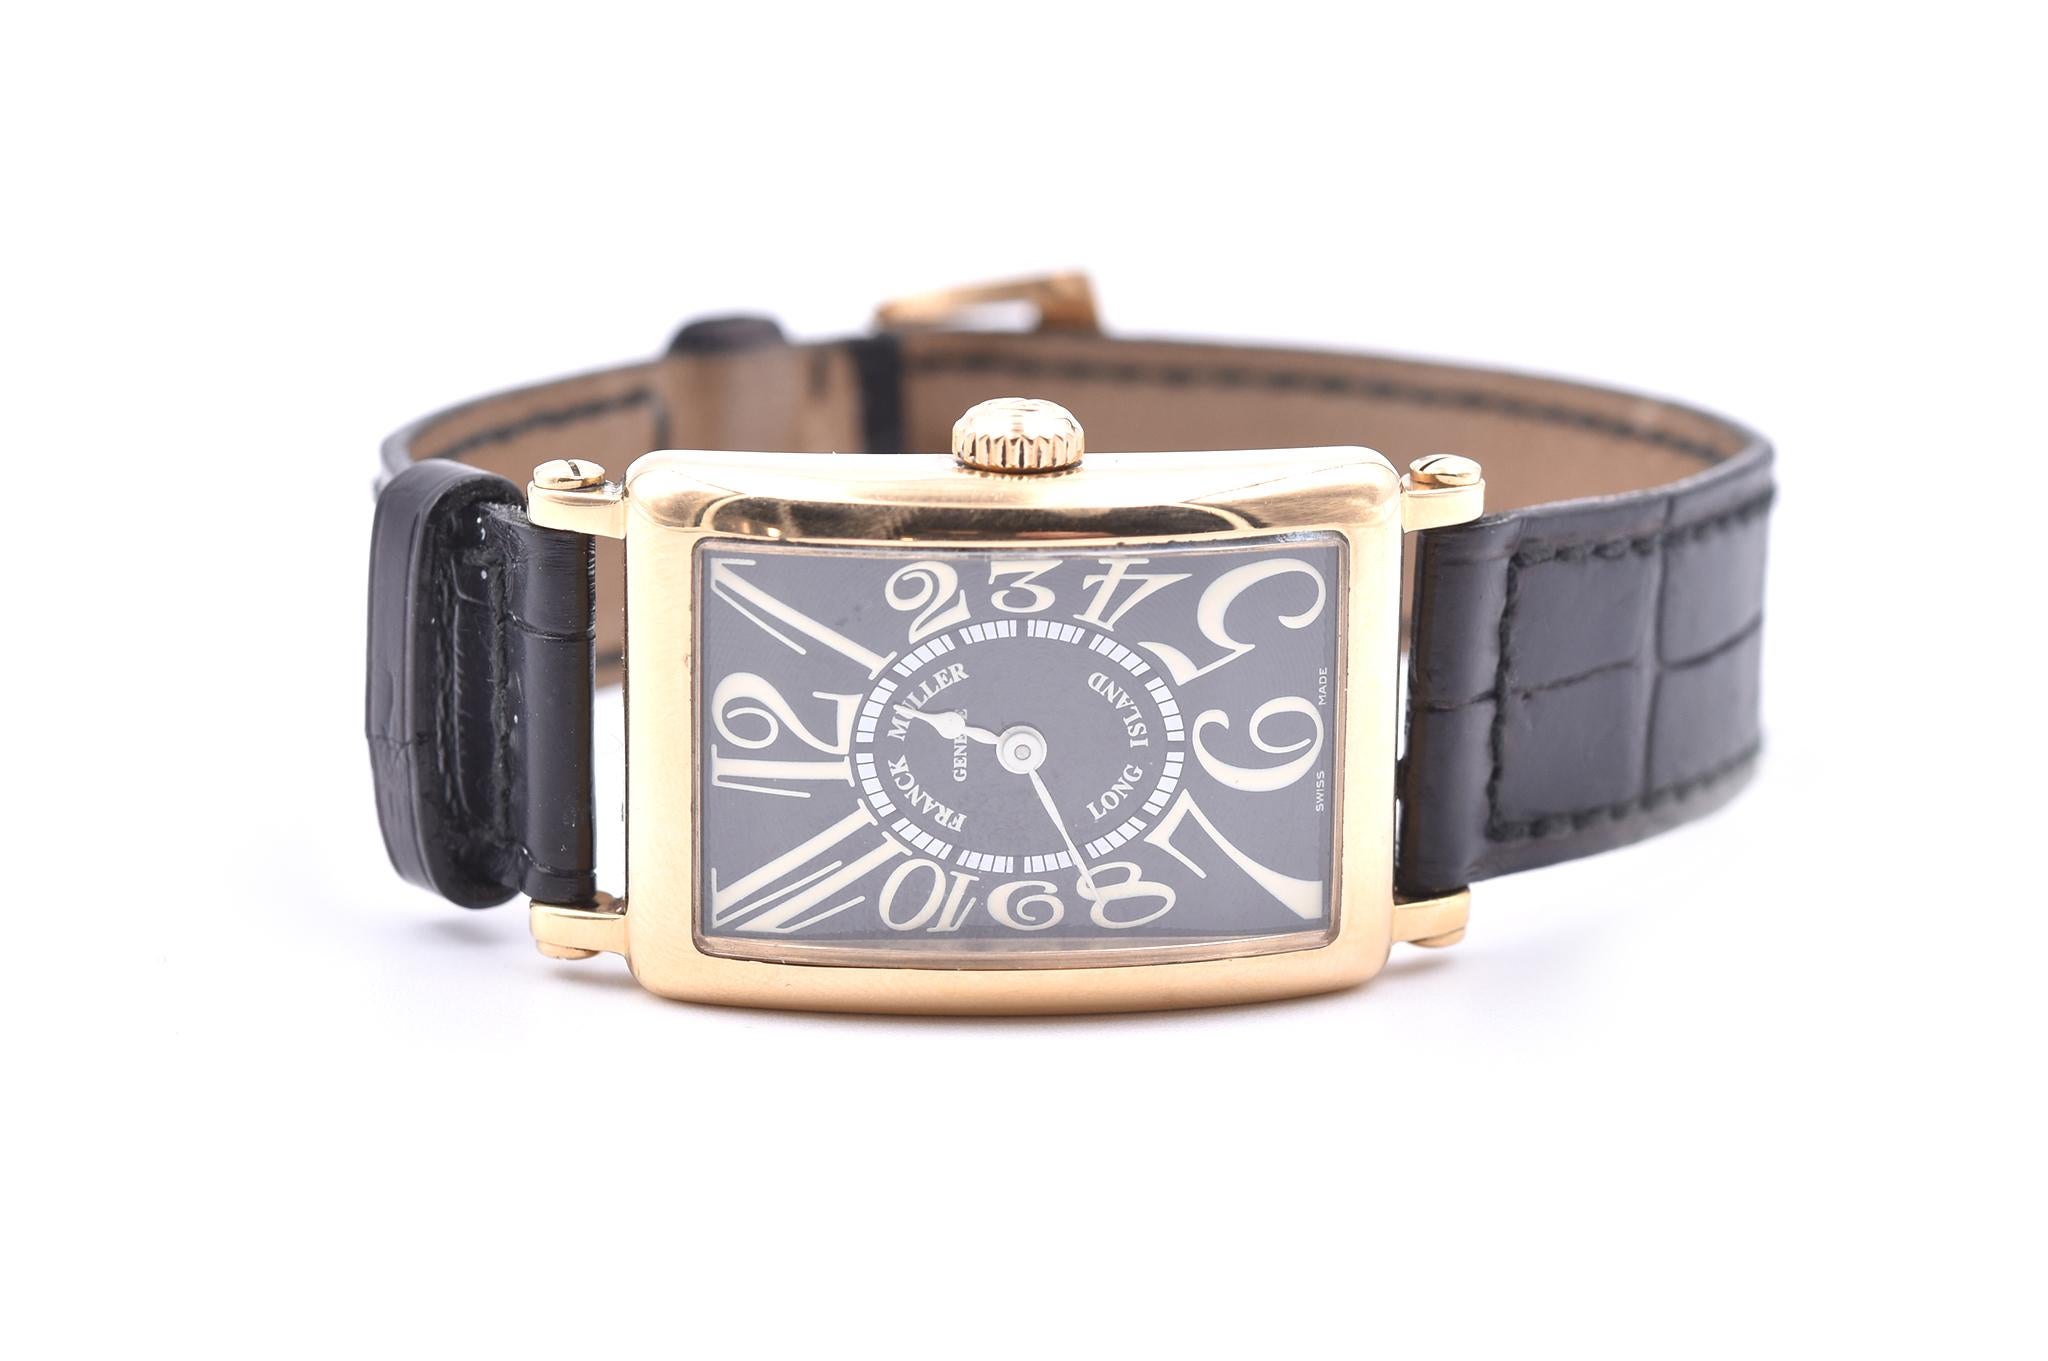 Movement: Quartz
Function: hours, minutes
Case: 36mm x 26mm 18k rose gold case, push/pull crown, sapphire crystal
Band: black leather strap with rose gold buckle
Dial: black dial with cream Arabic numerals
Serial #: 2XXX
Reference #: 900 QZ Long